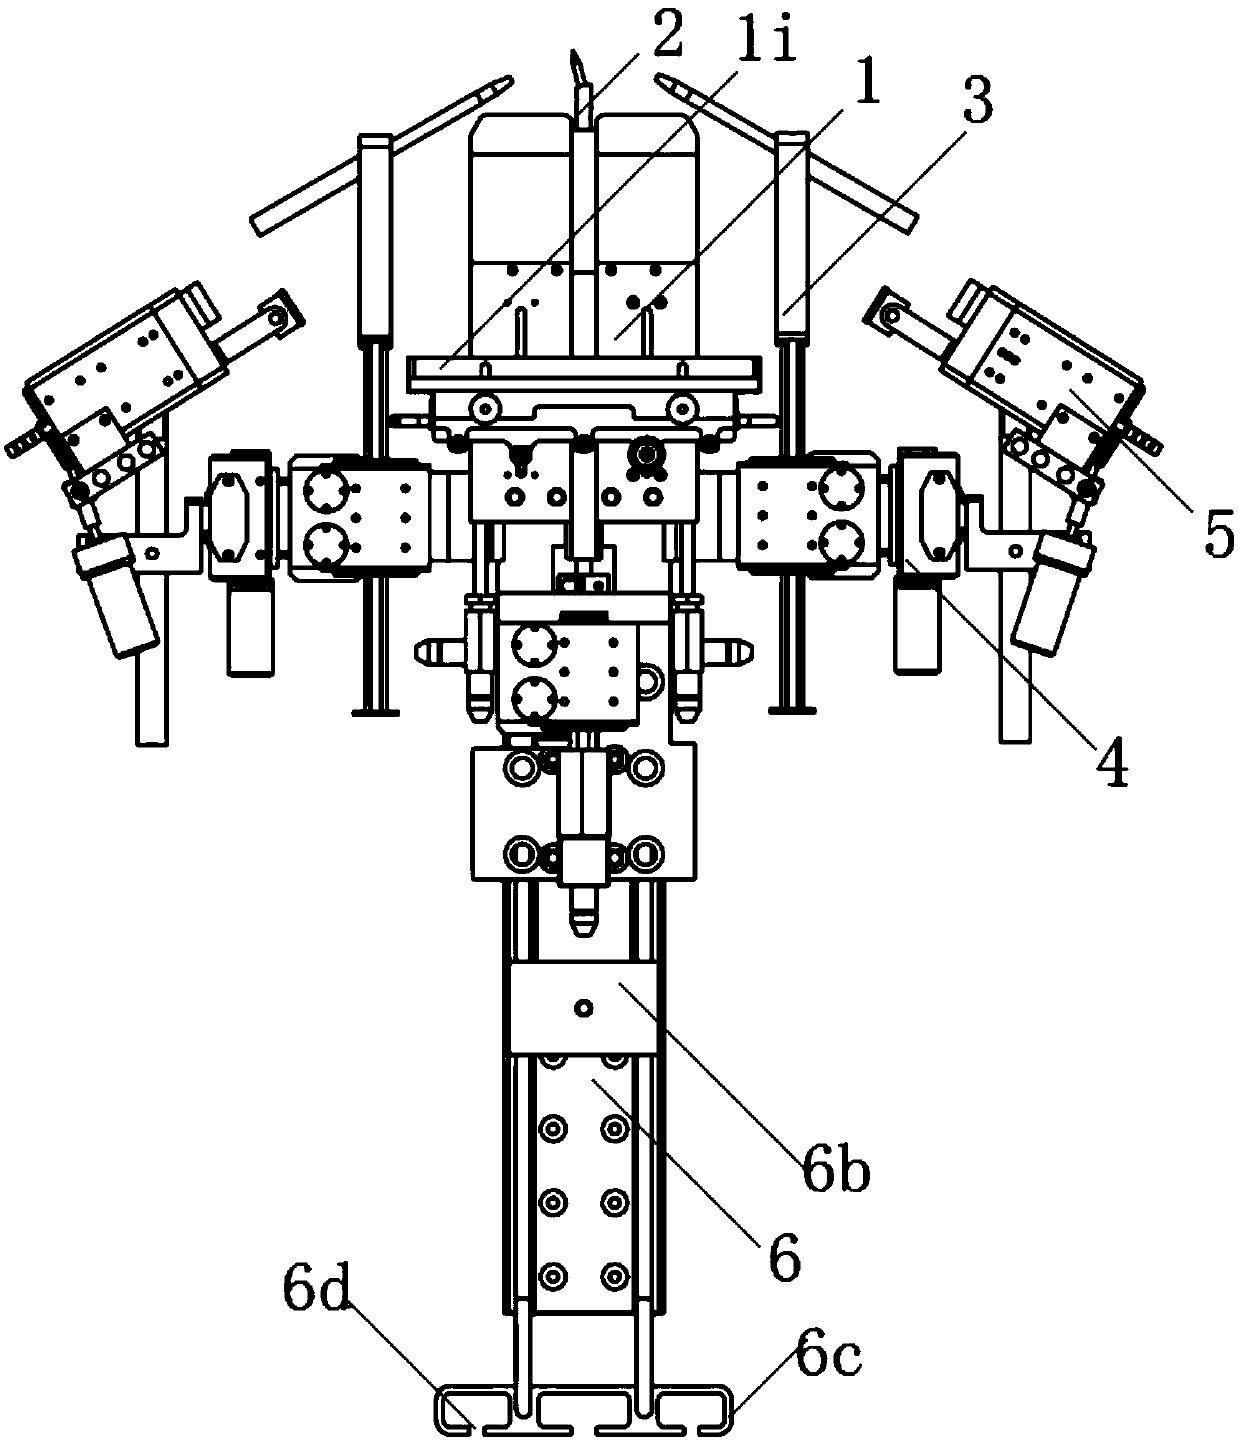 A tungsten electrode system for a welding machine head